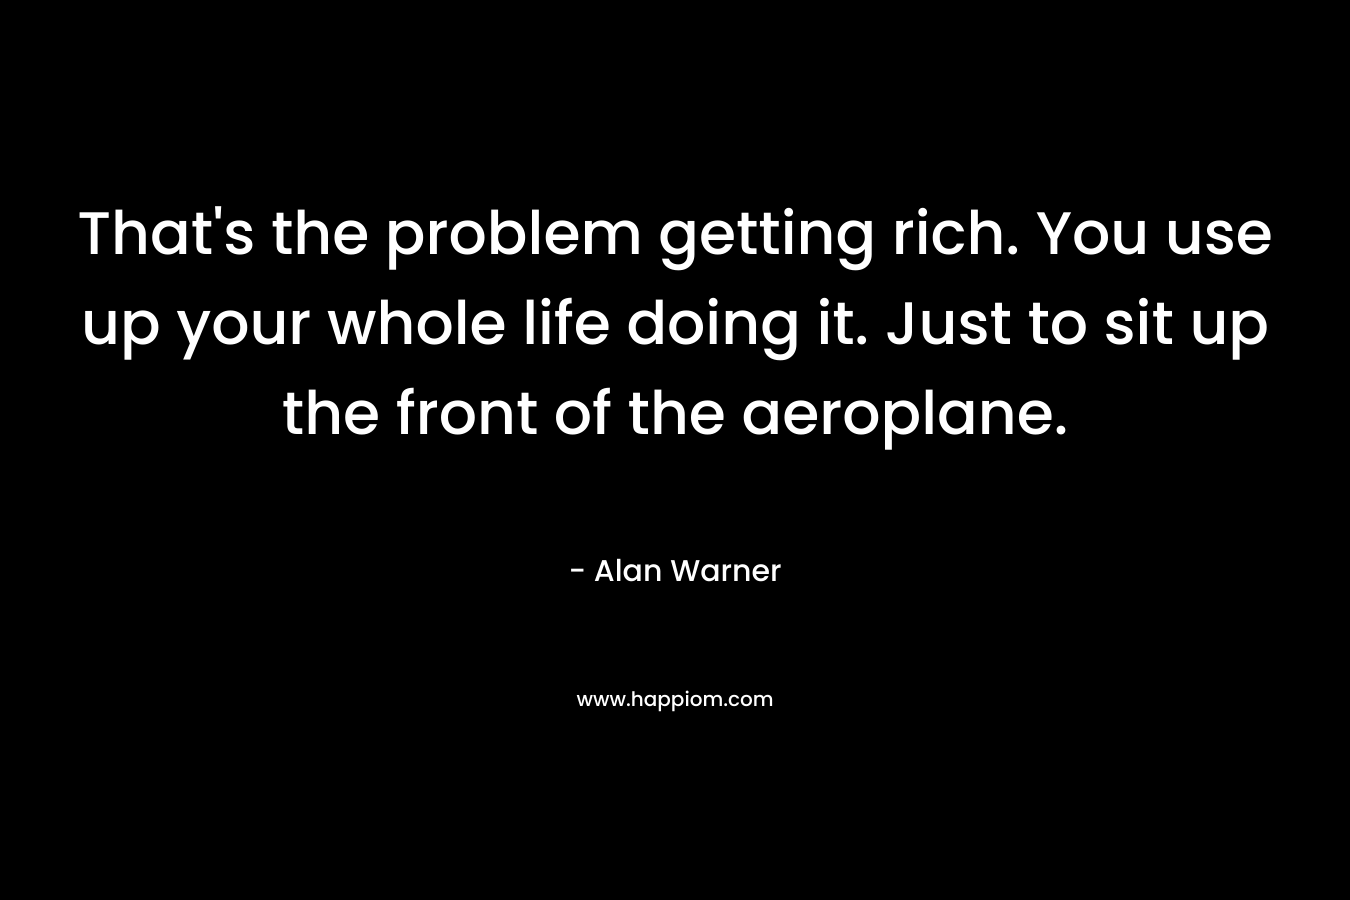 That's the problem getting rich. You use up your whole life doing it. Just to sit up the front of the aeroplane.